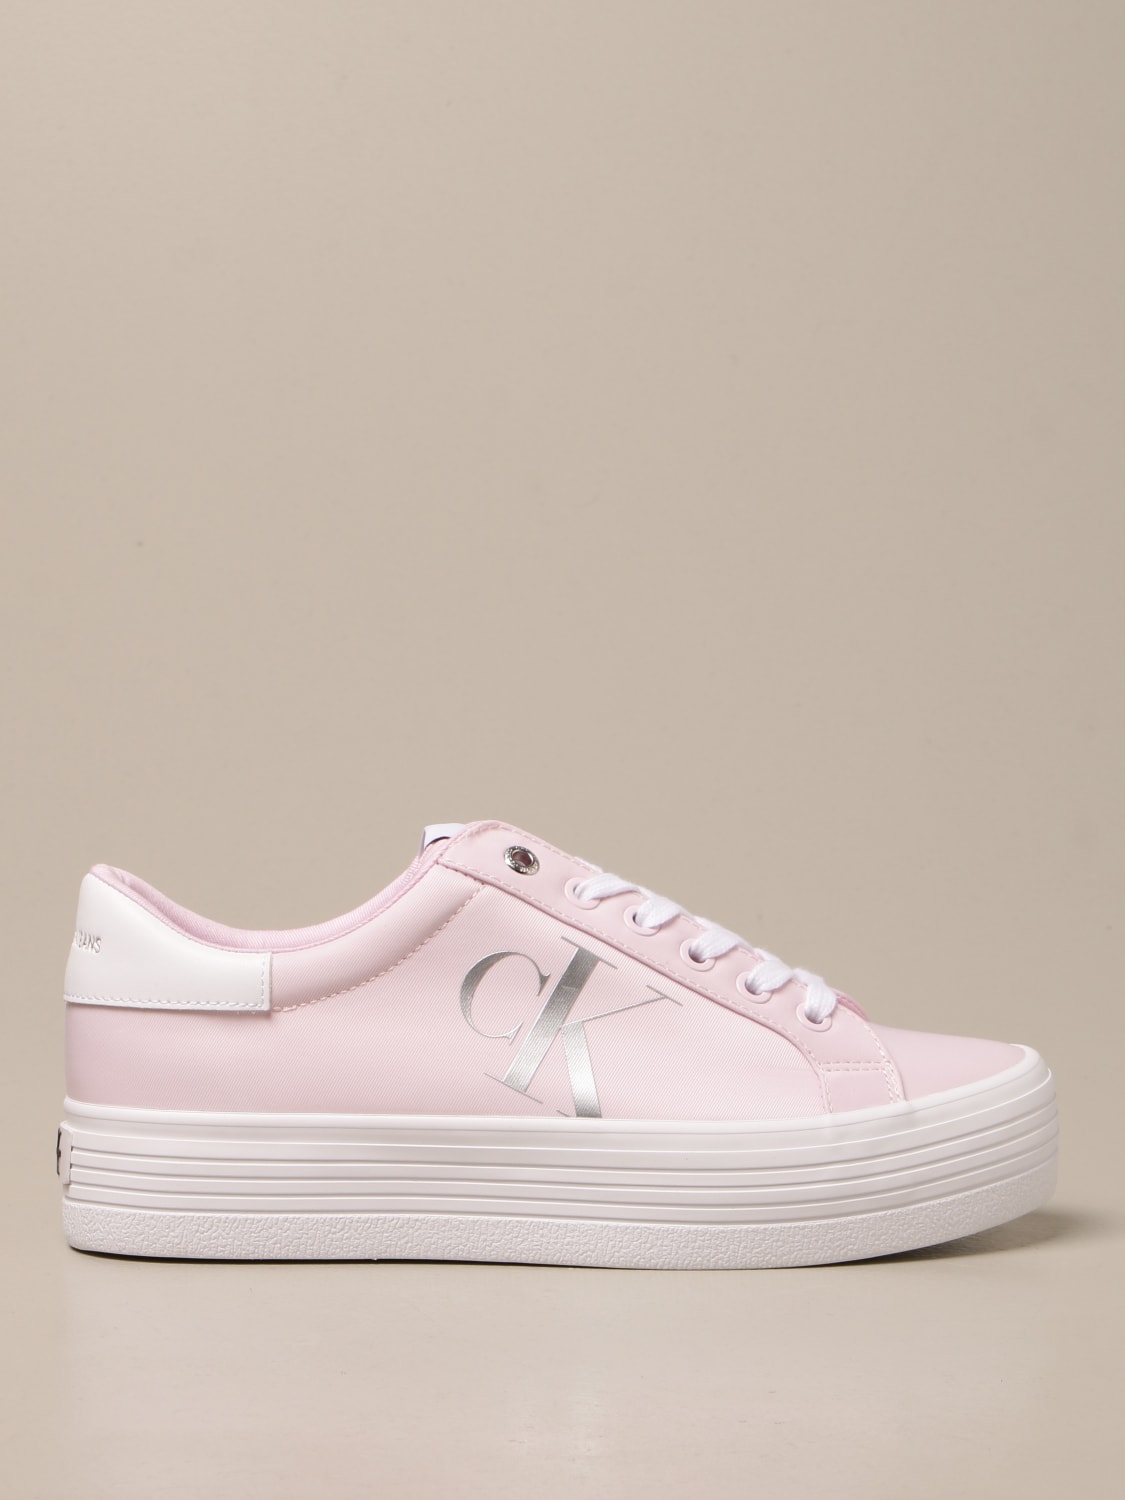 CALVIN KLEIN JEANS Shoes women pink size EU XL - Fast delivery